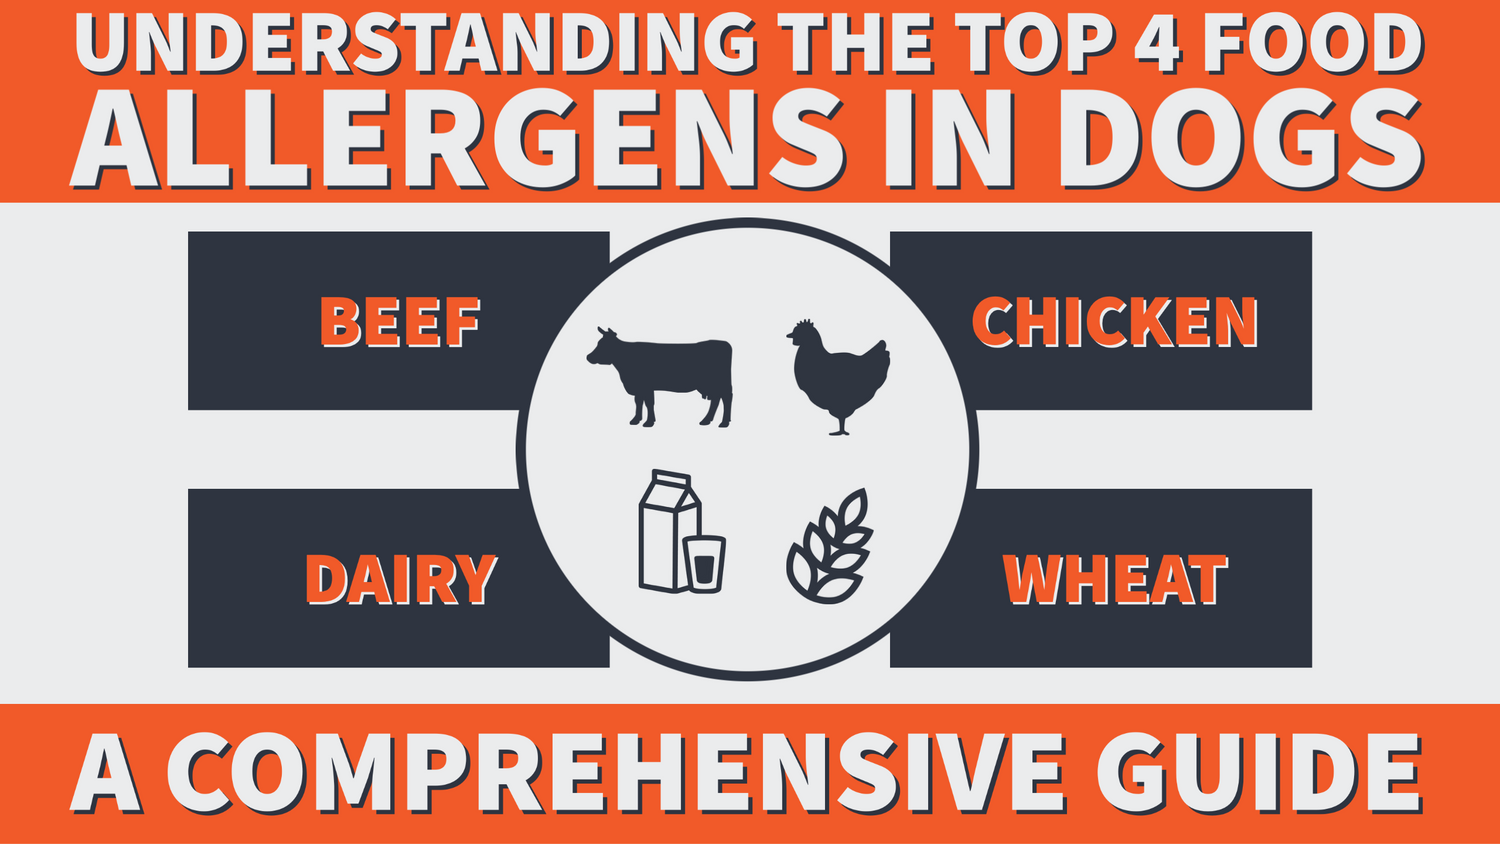 Text “Understanding the top 4 food allergens in dogs” with icons for beef, chicken, dairy and wheat under it